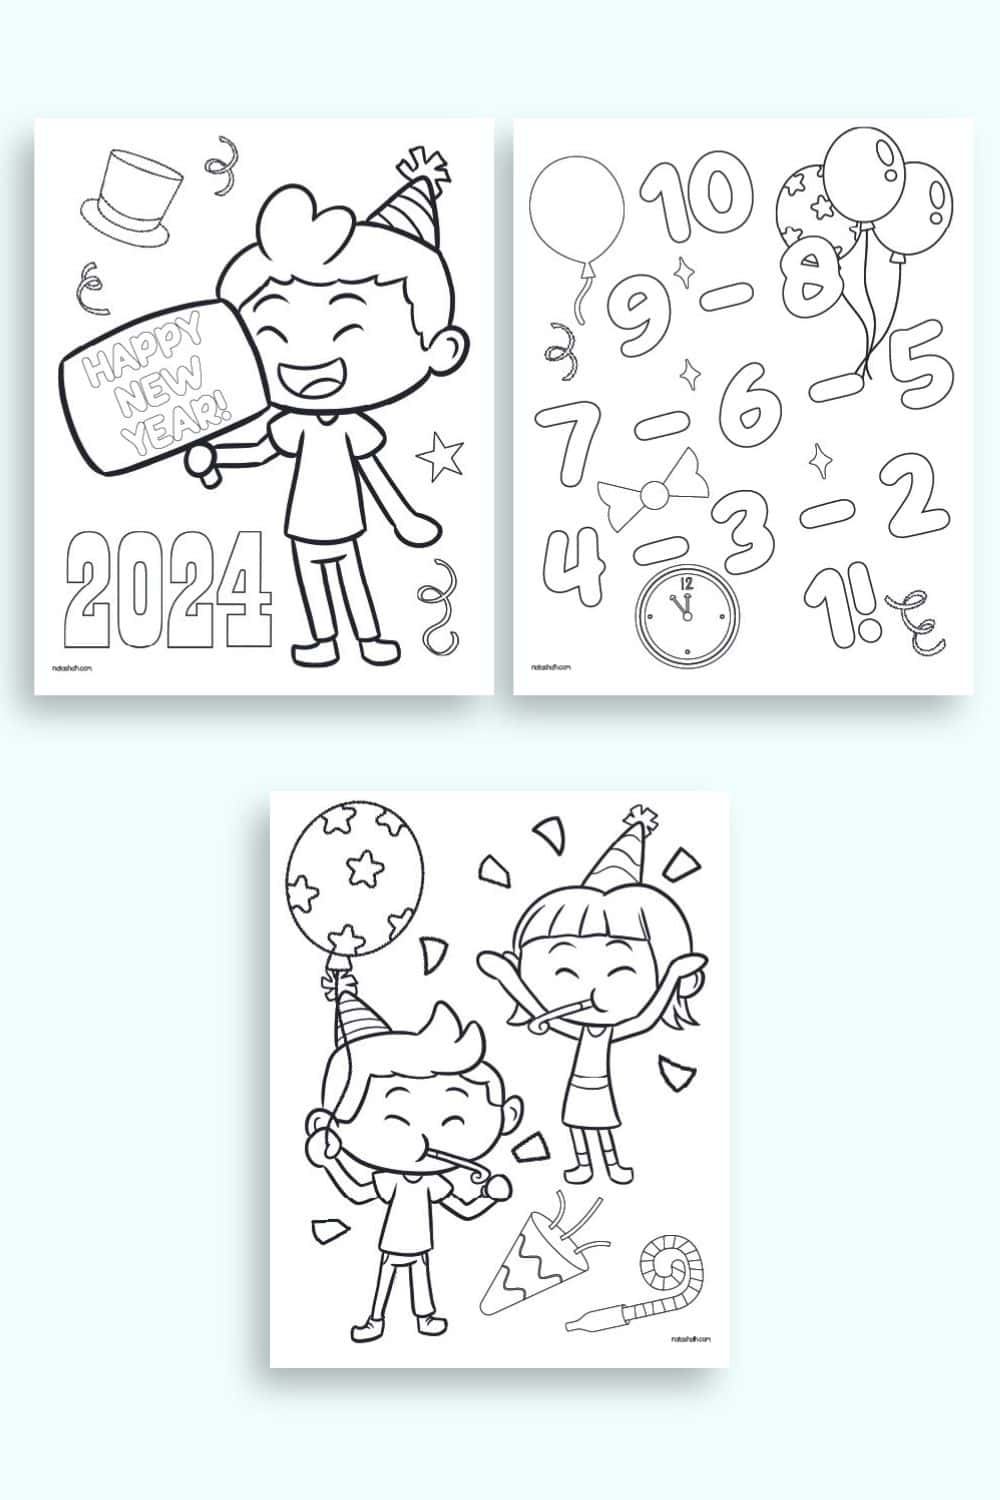 A preview of three New Year's Eve themed coloring pages for kids